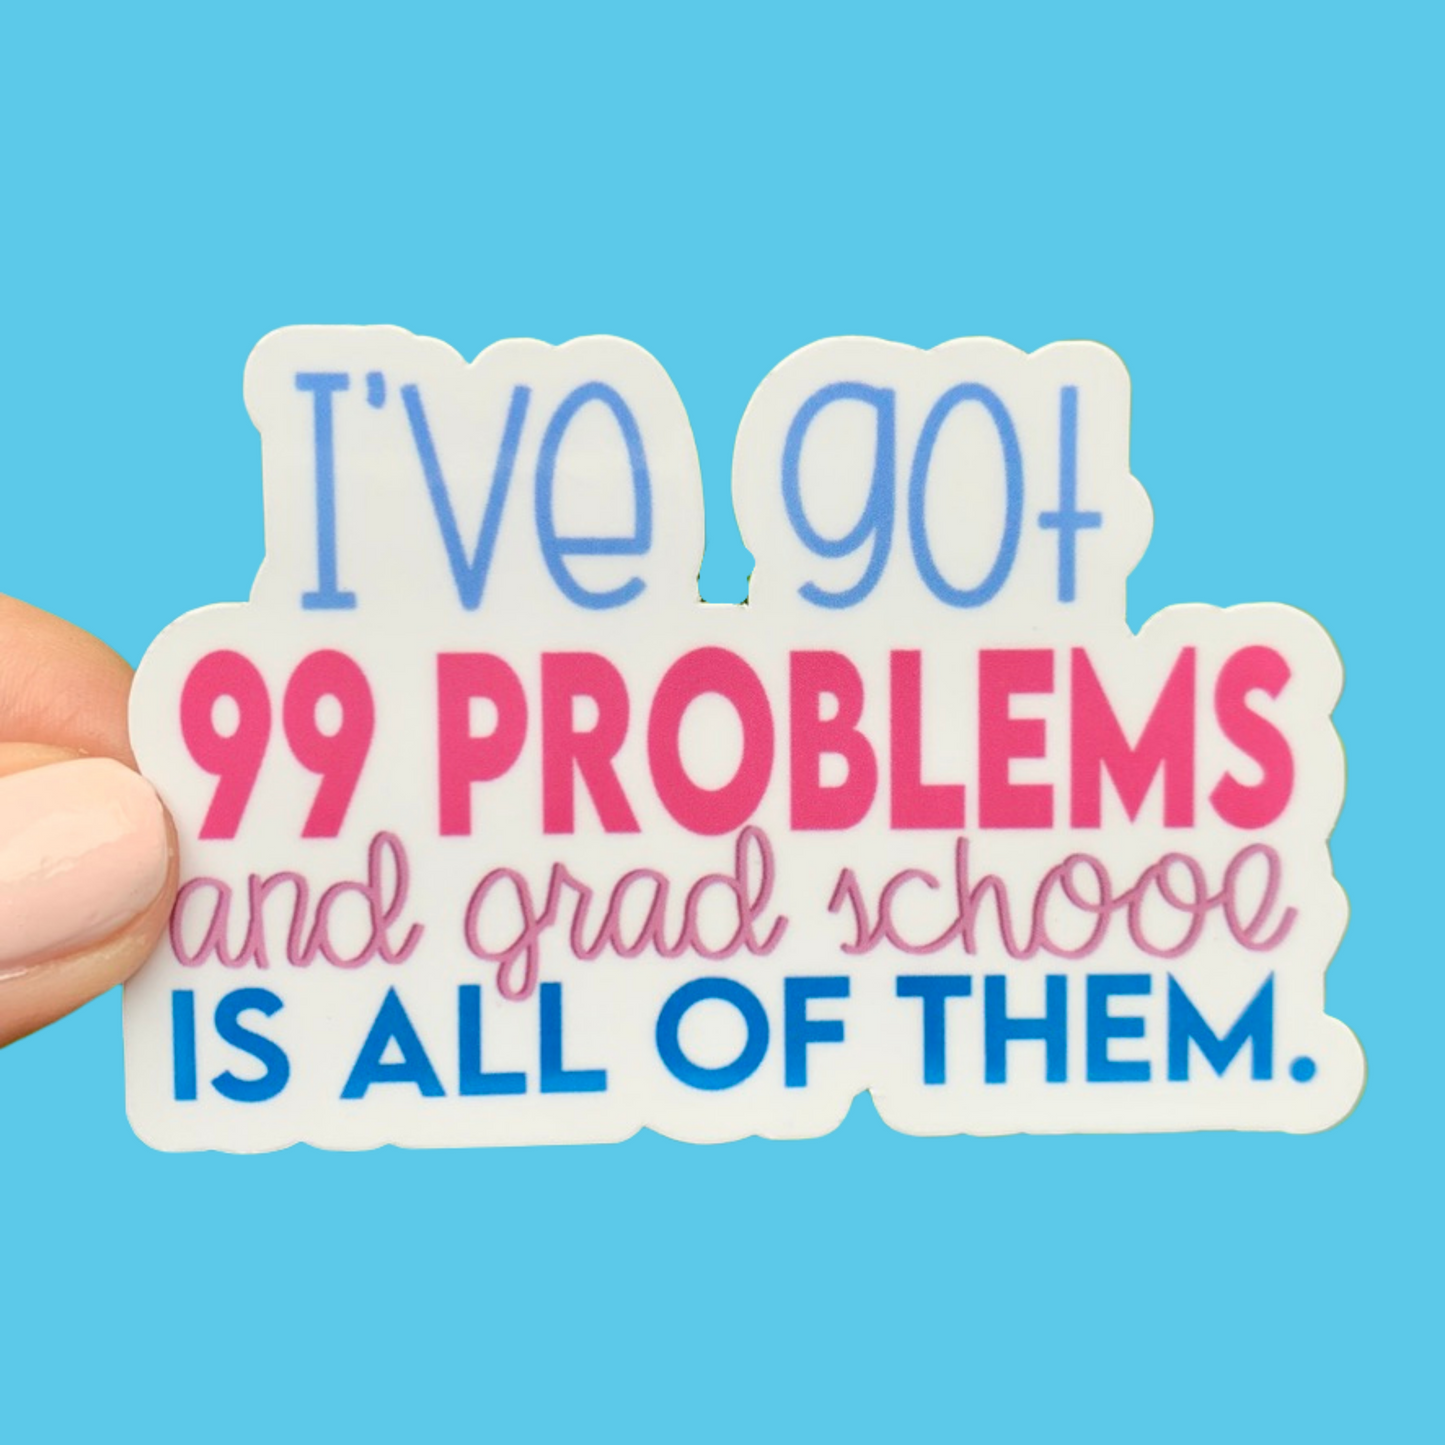 99 Problems and Grad School is All of Them Sticker